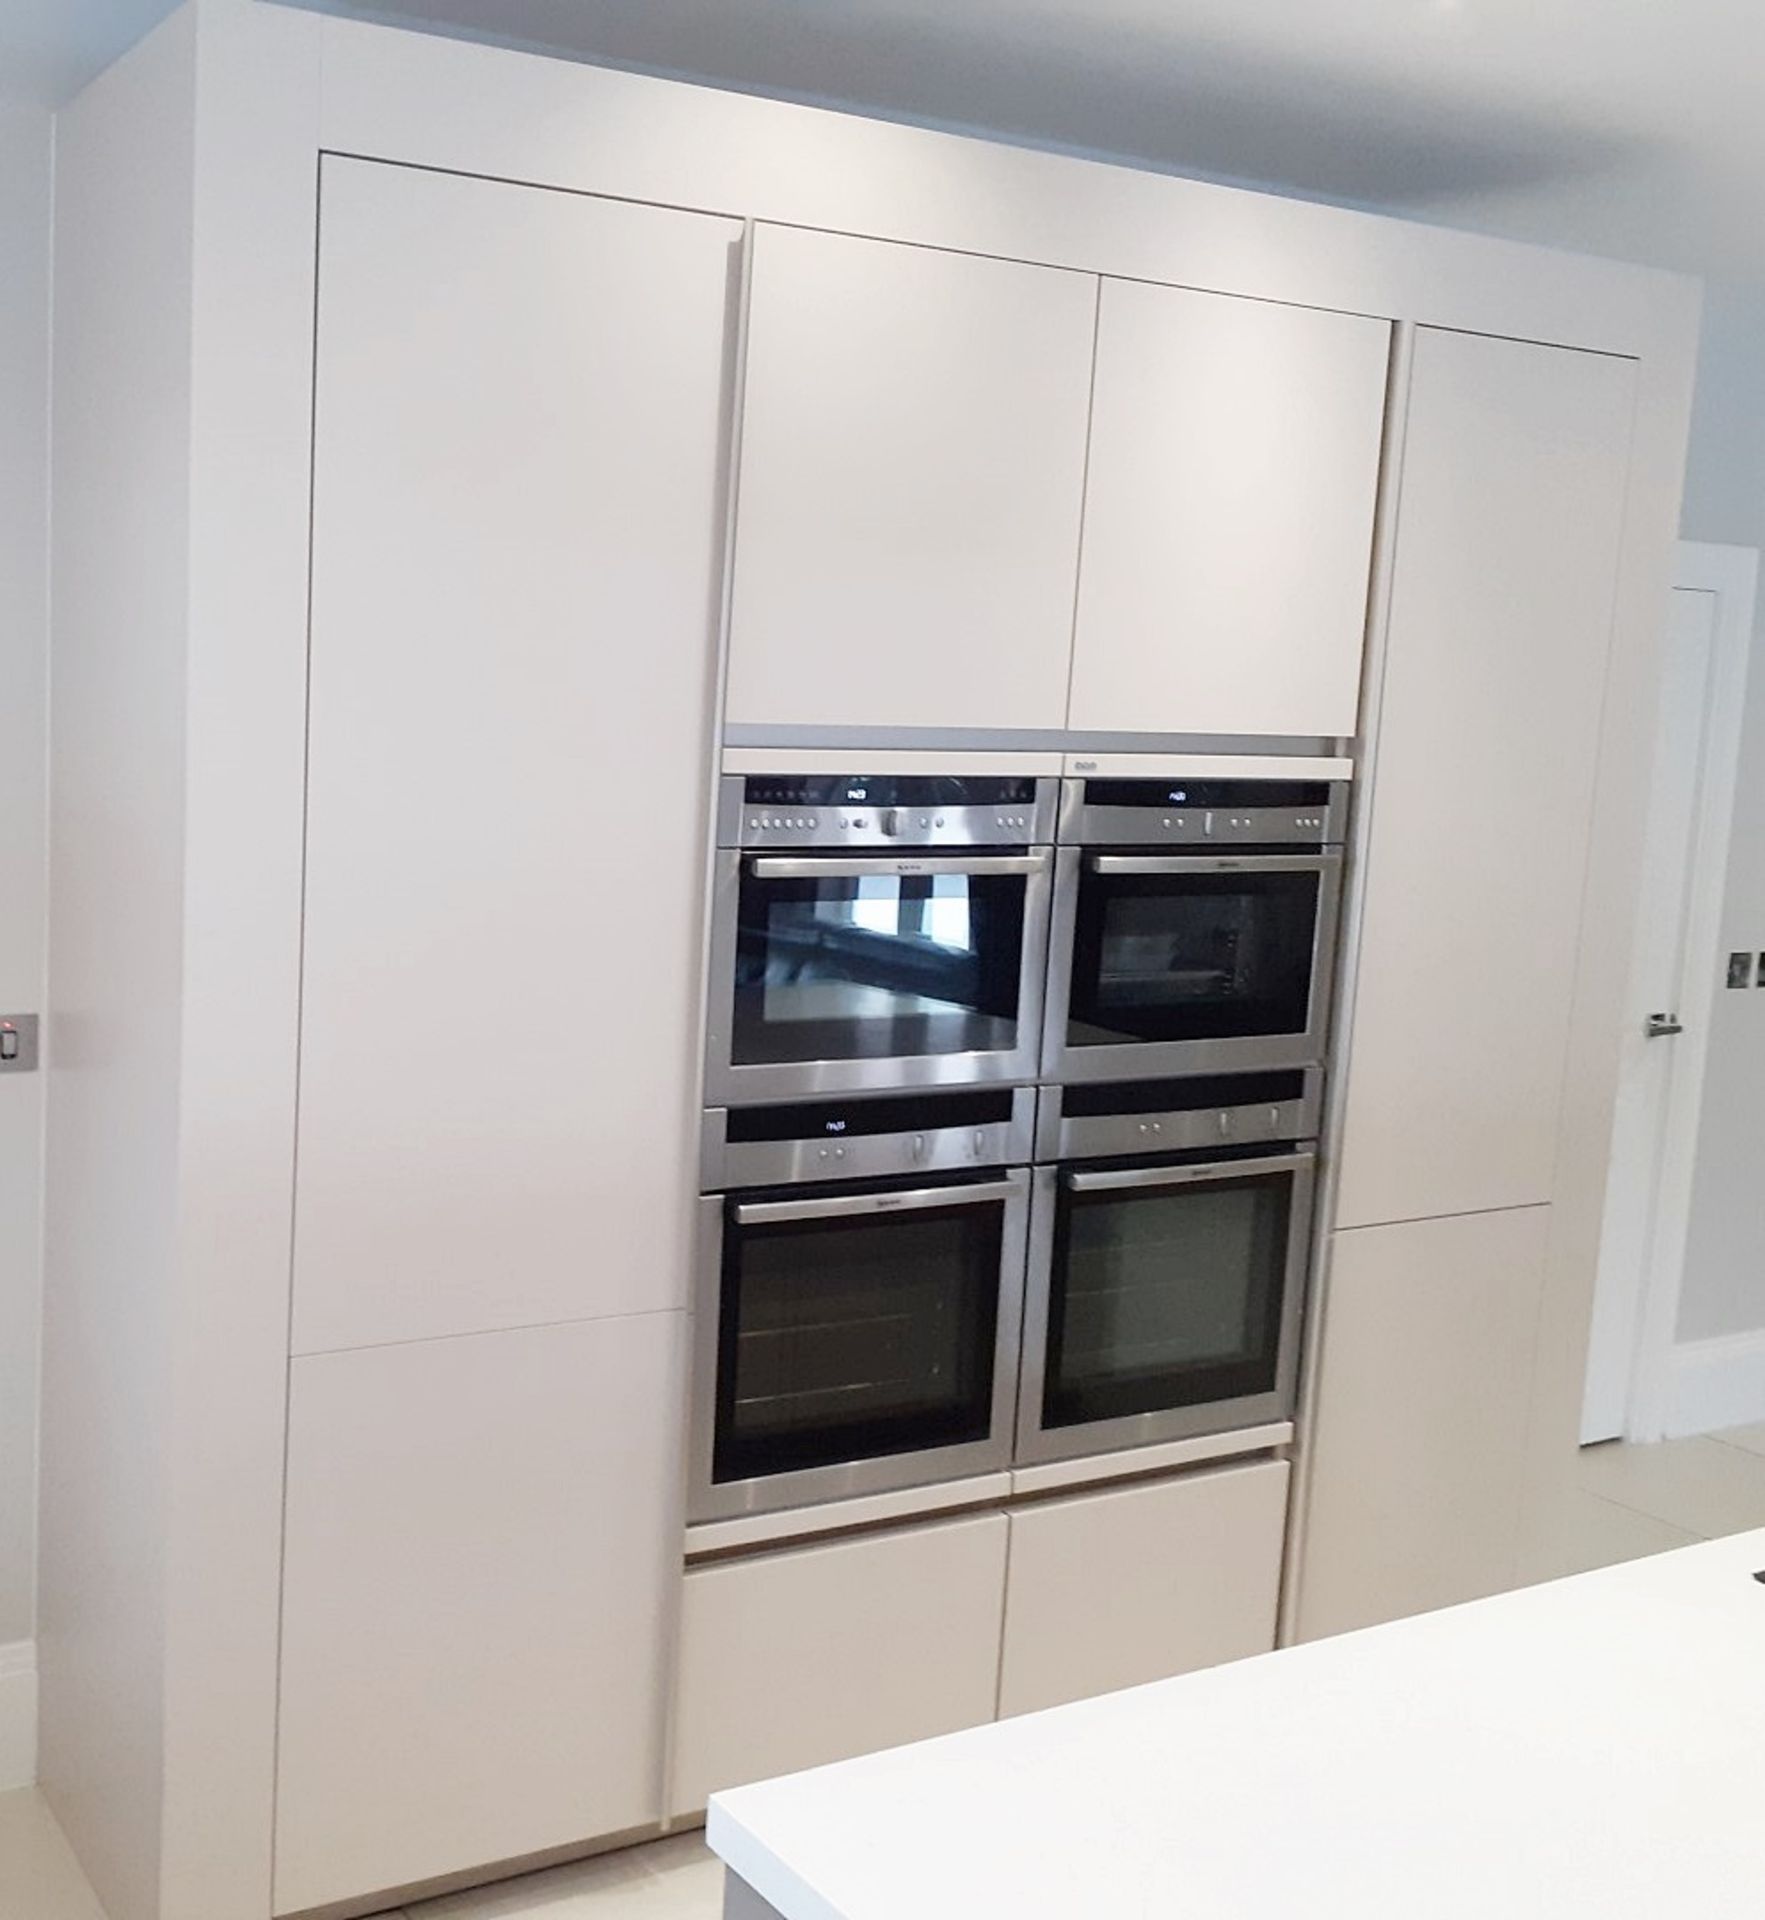 1 x SieMatic Handleless Fitted Kitchen With Intergrated NEFF Appliances, Corian Worktops And Island - Image 13 of 92